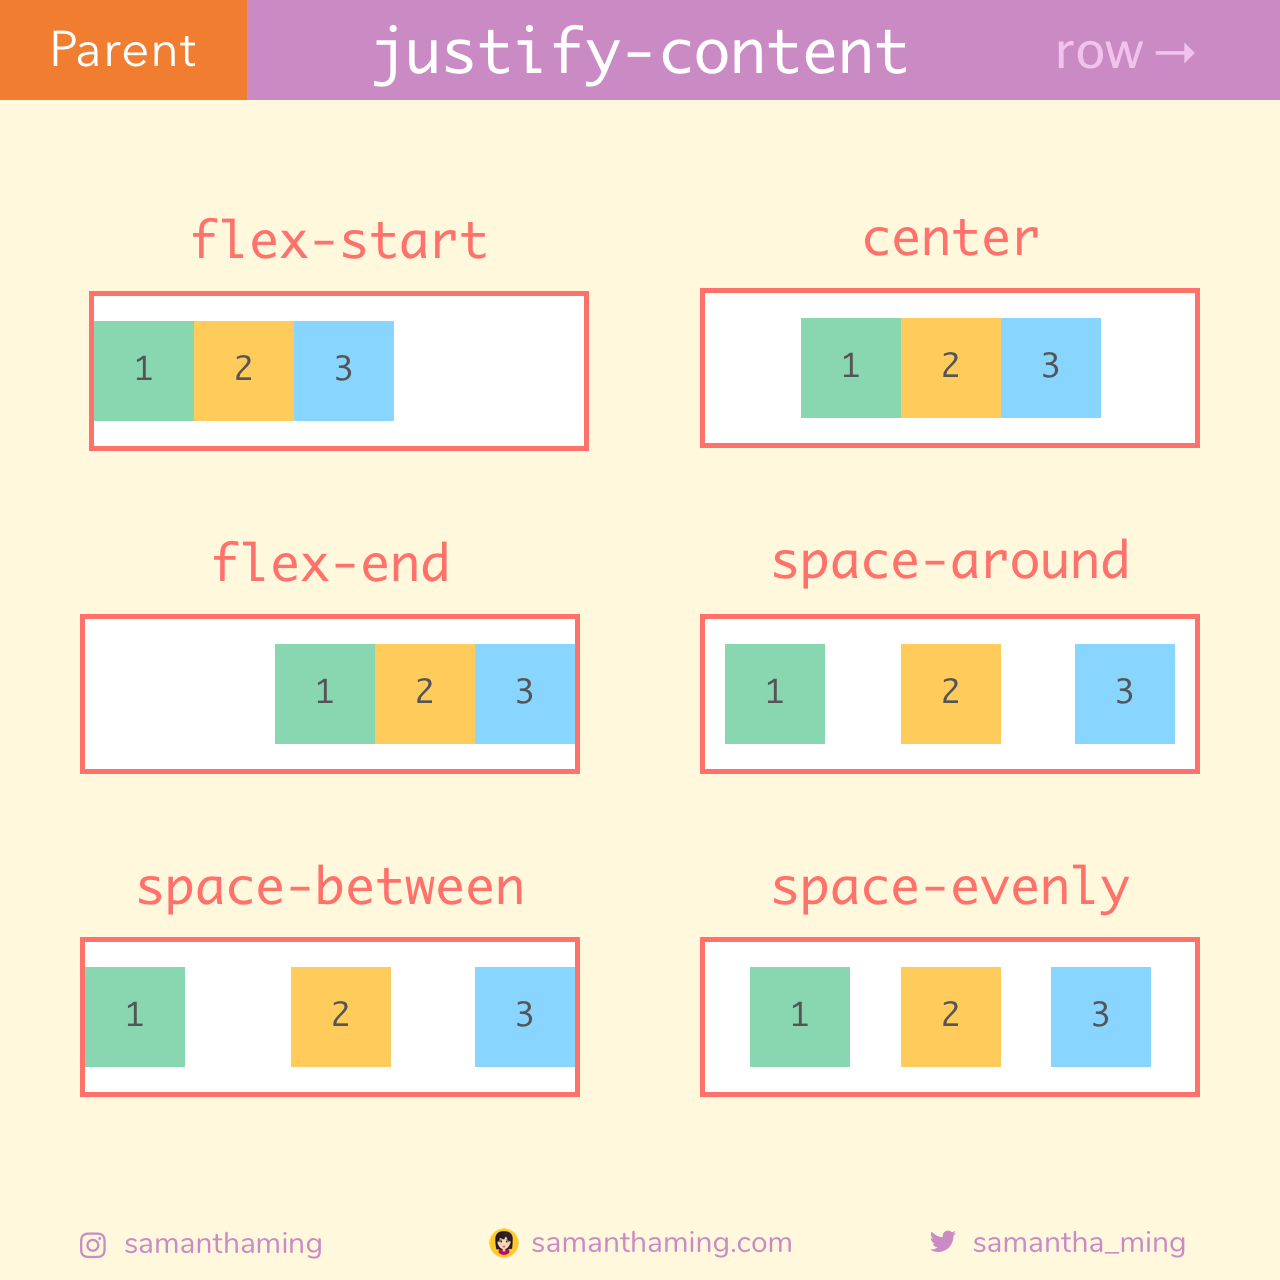 Justify-content: Space-between;. Justify-content. Flex justify-content. Justify-content: Flex-start;. Justify content space